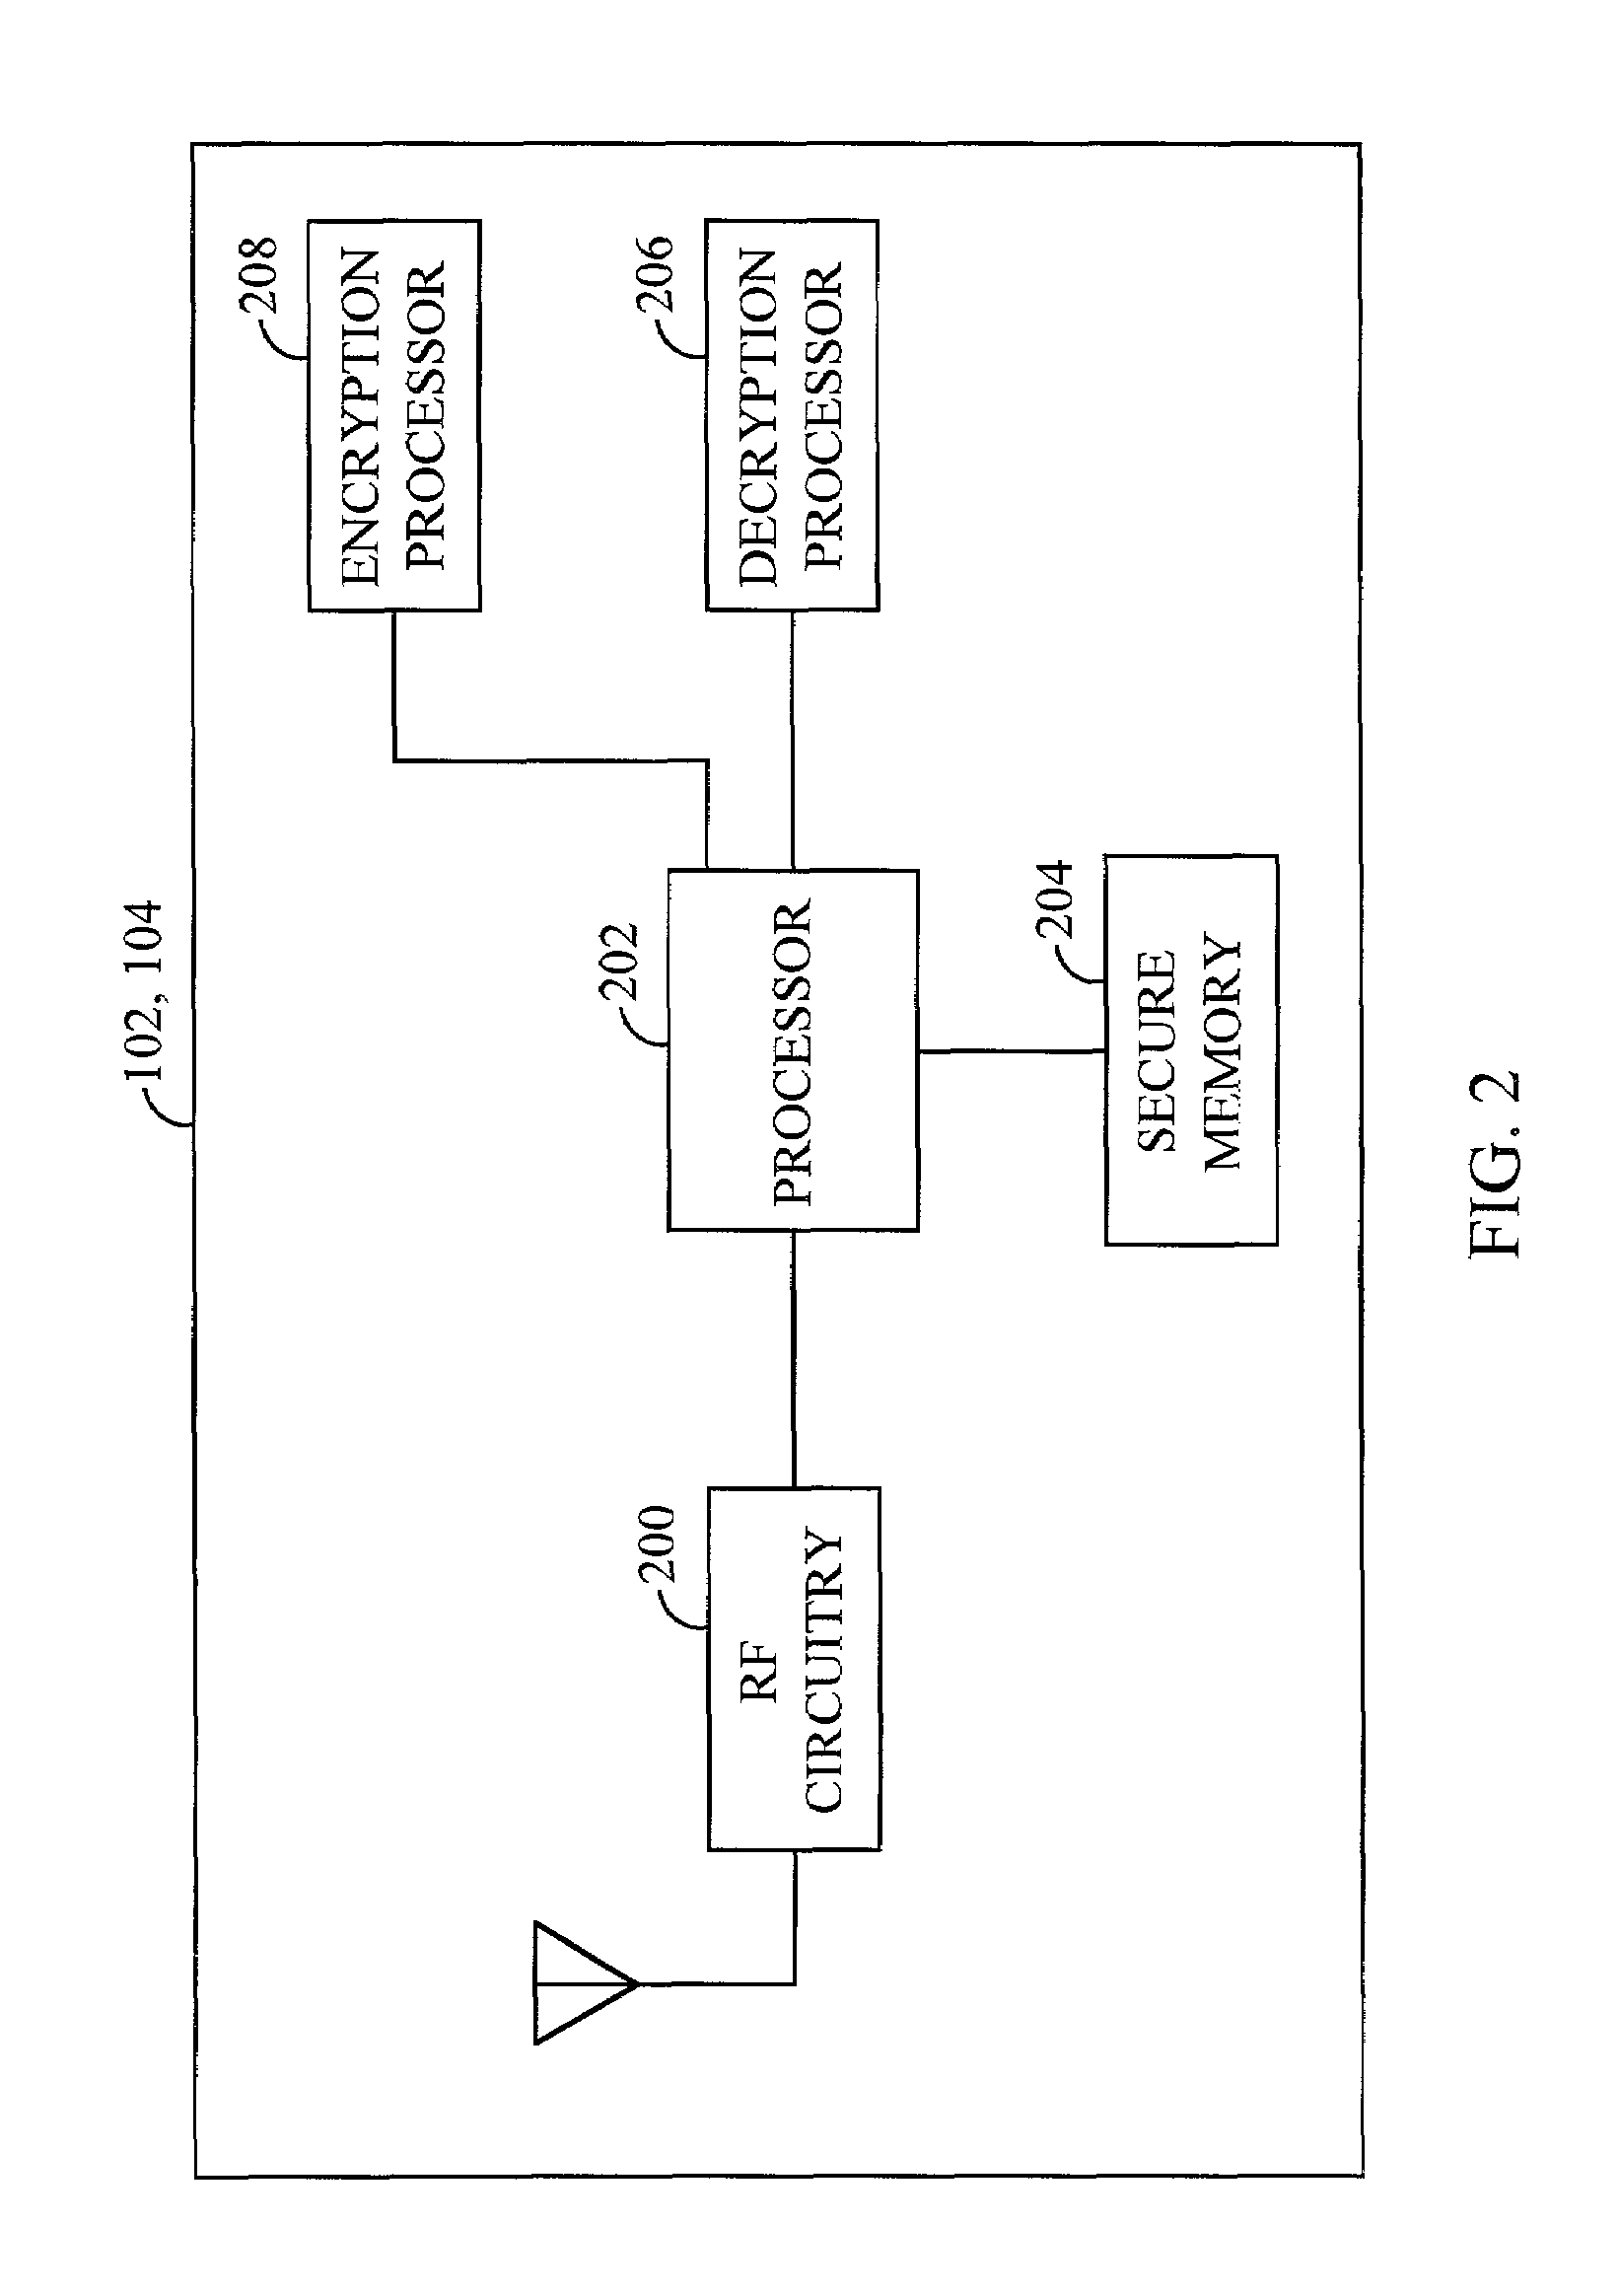 Method and apparatus for providing privacy of user identity and characteristics in a communication system